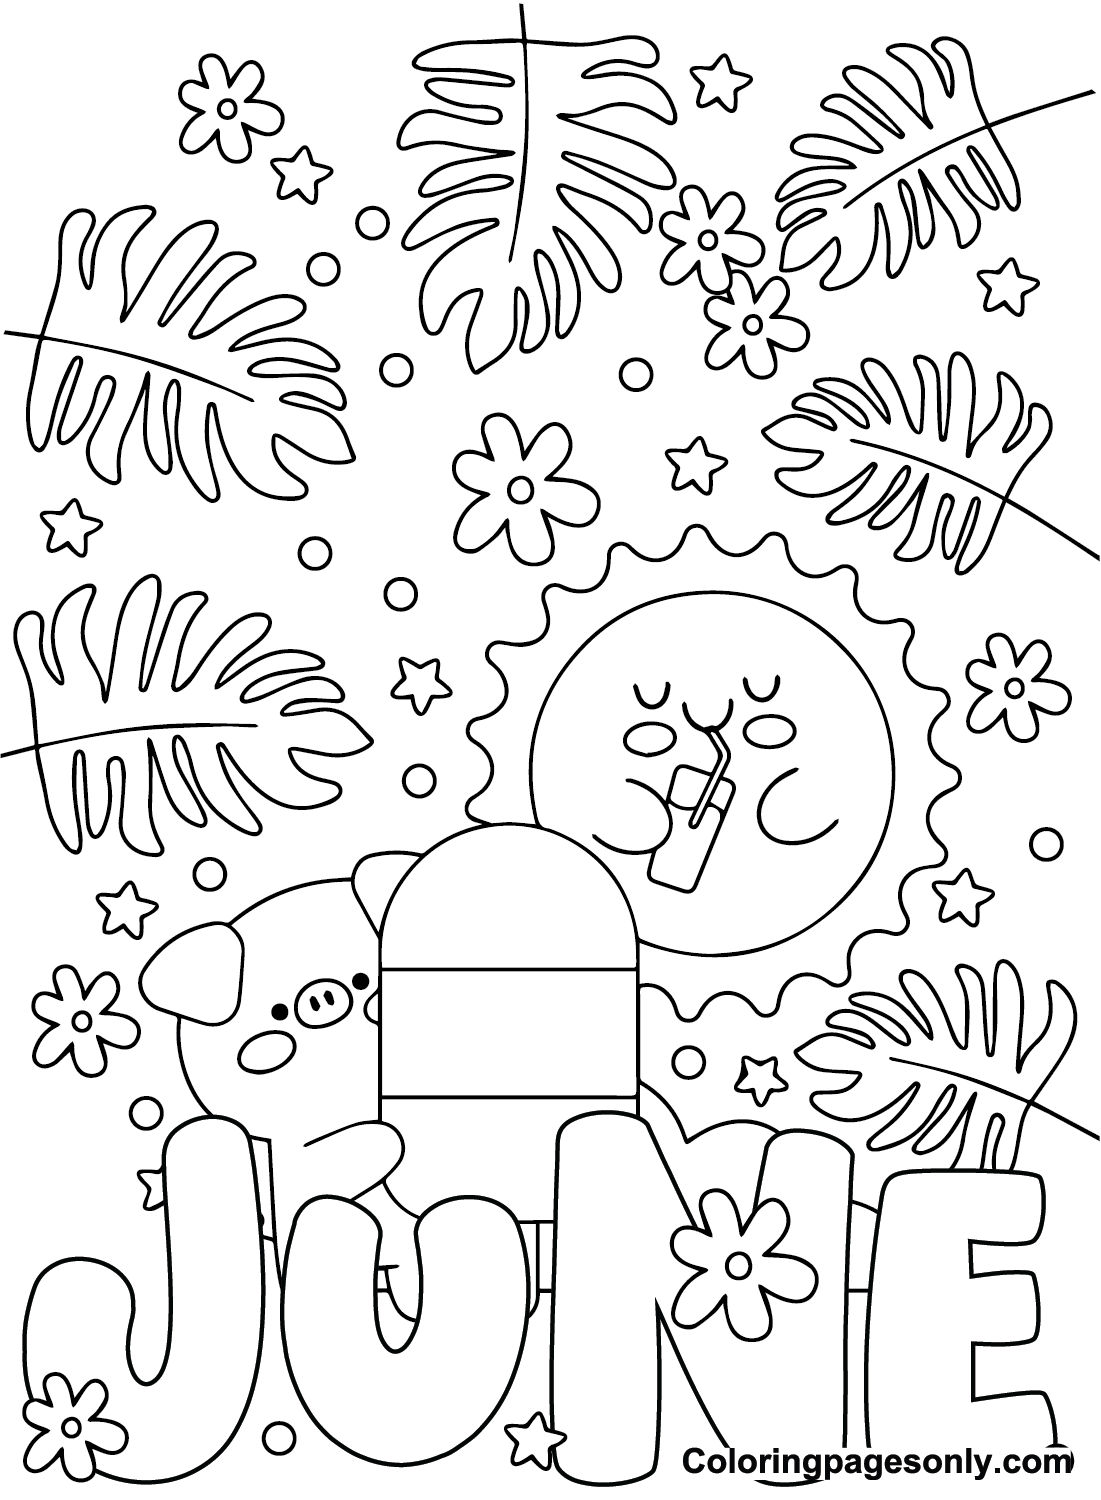 Printable June Coloring Page